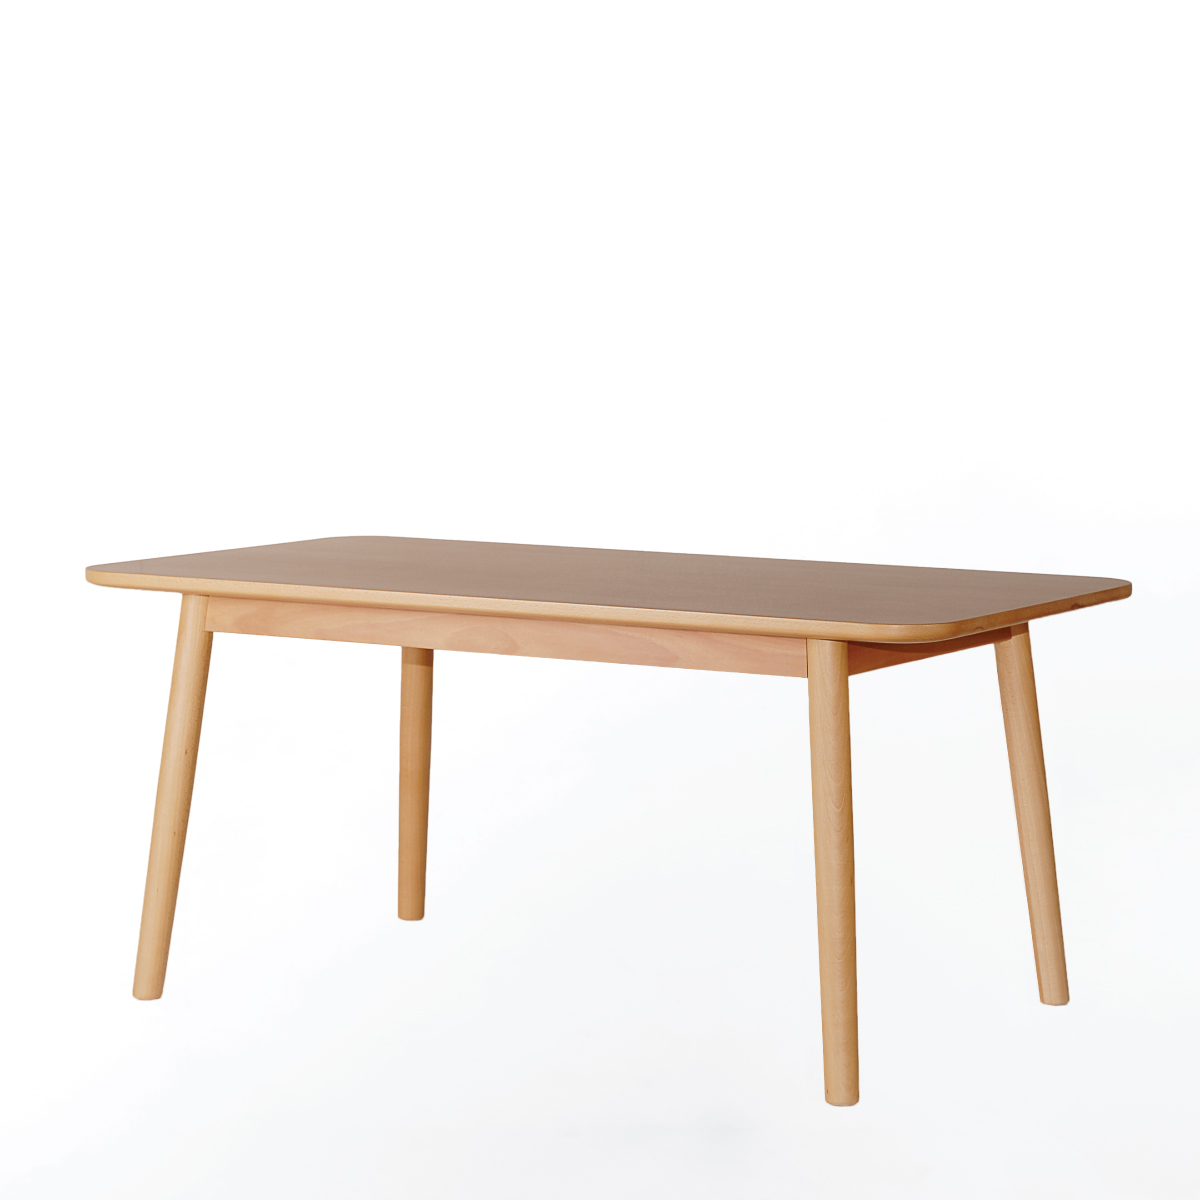 DT110 Cosmos Table